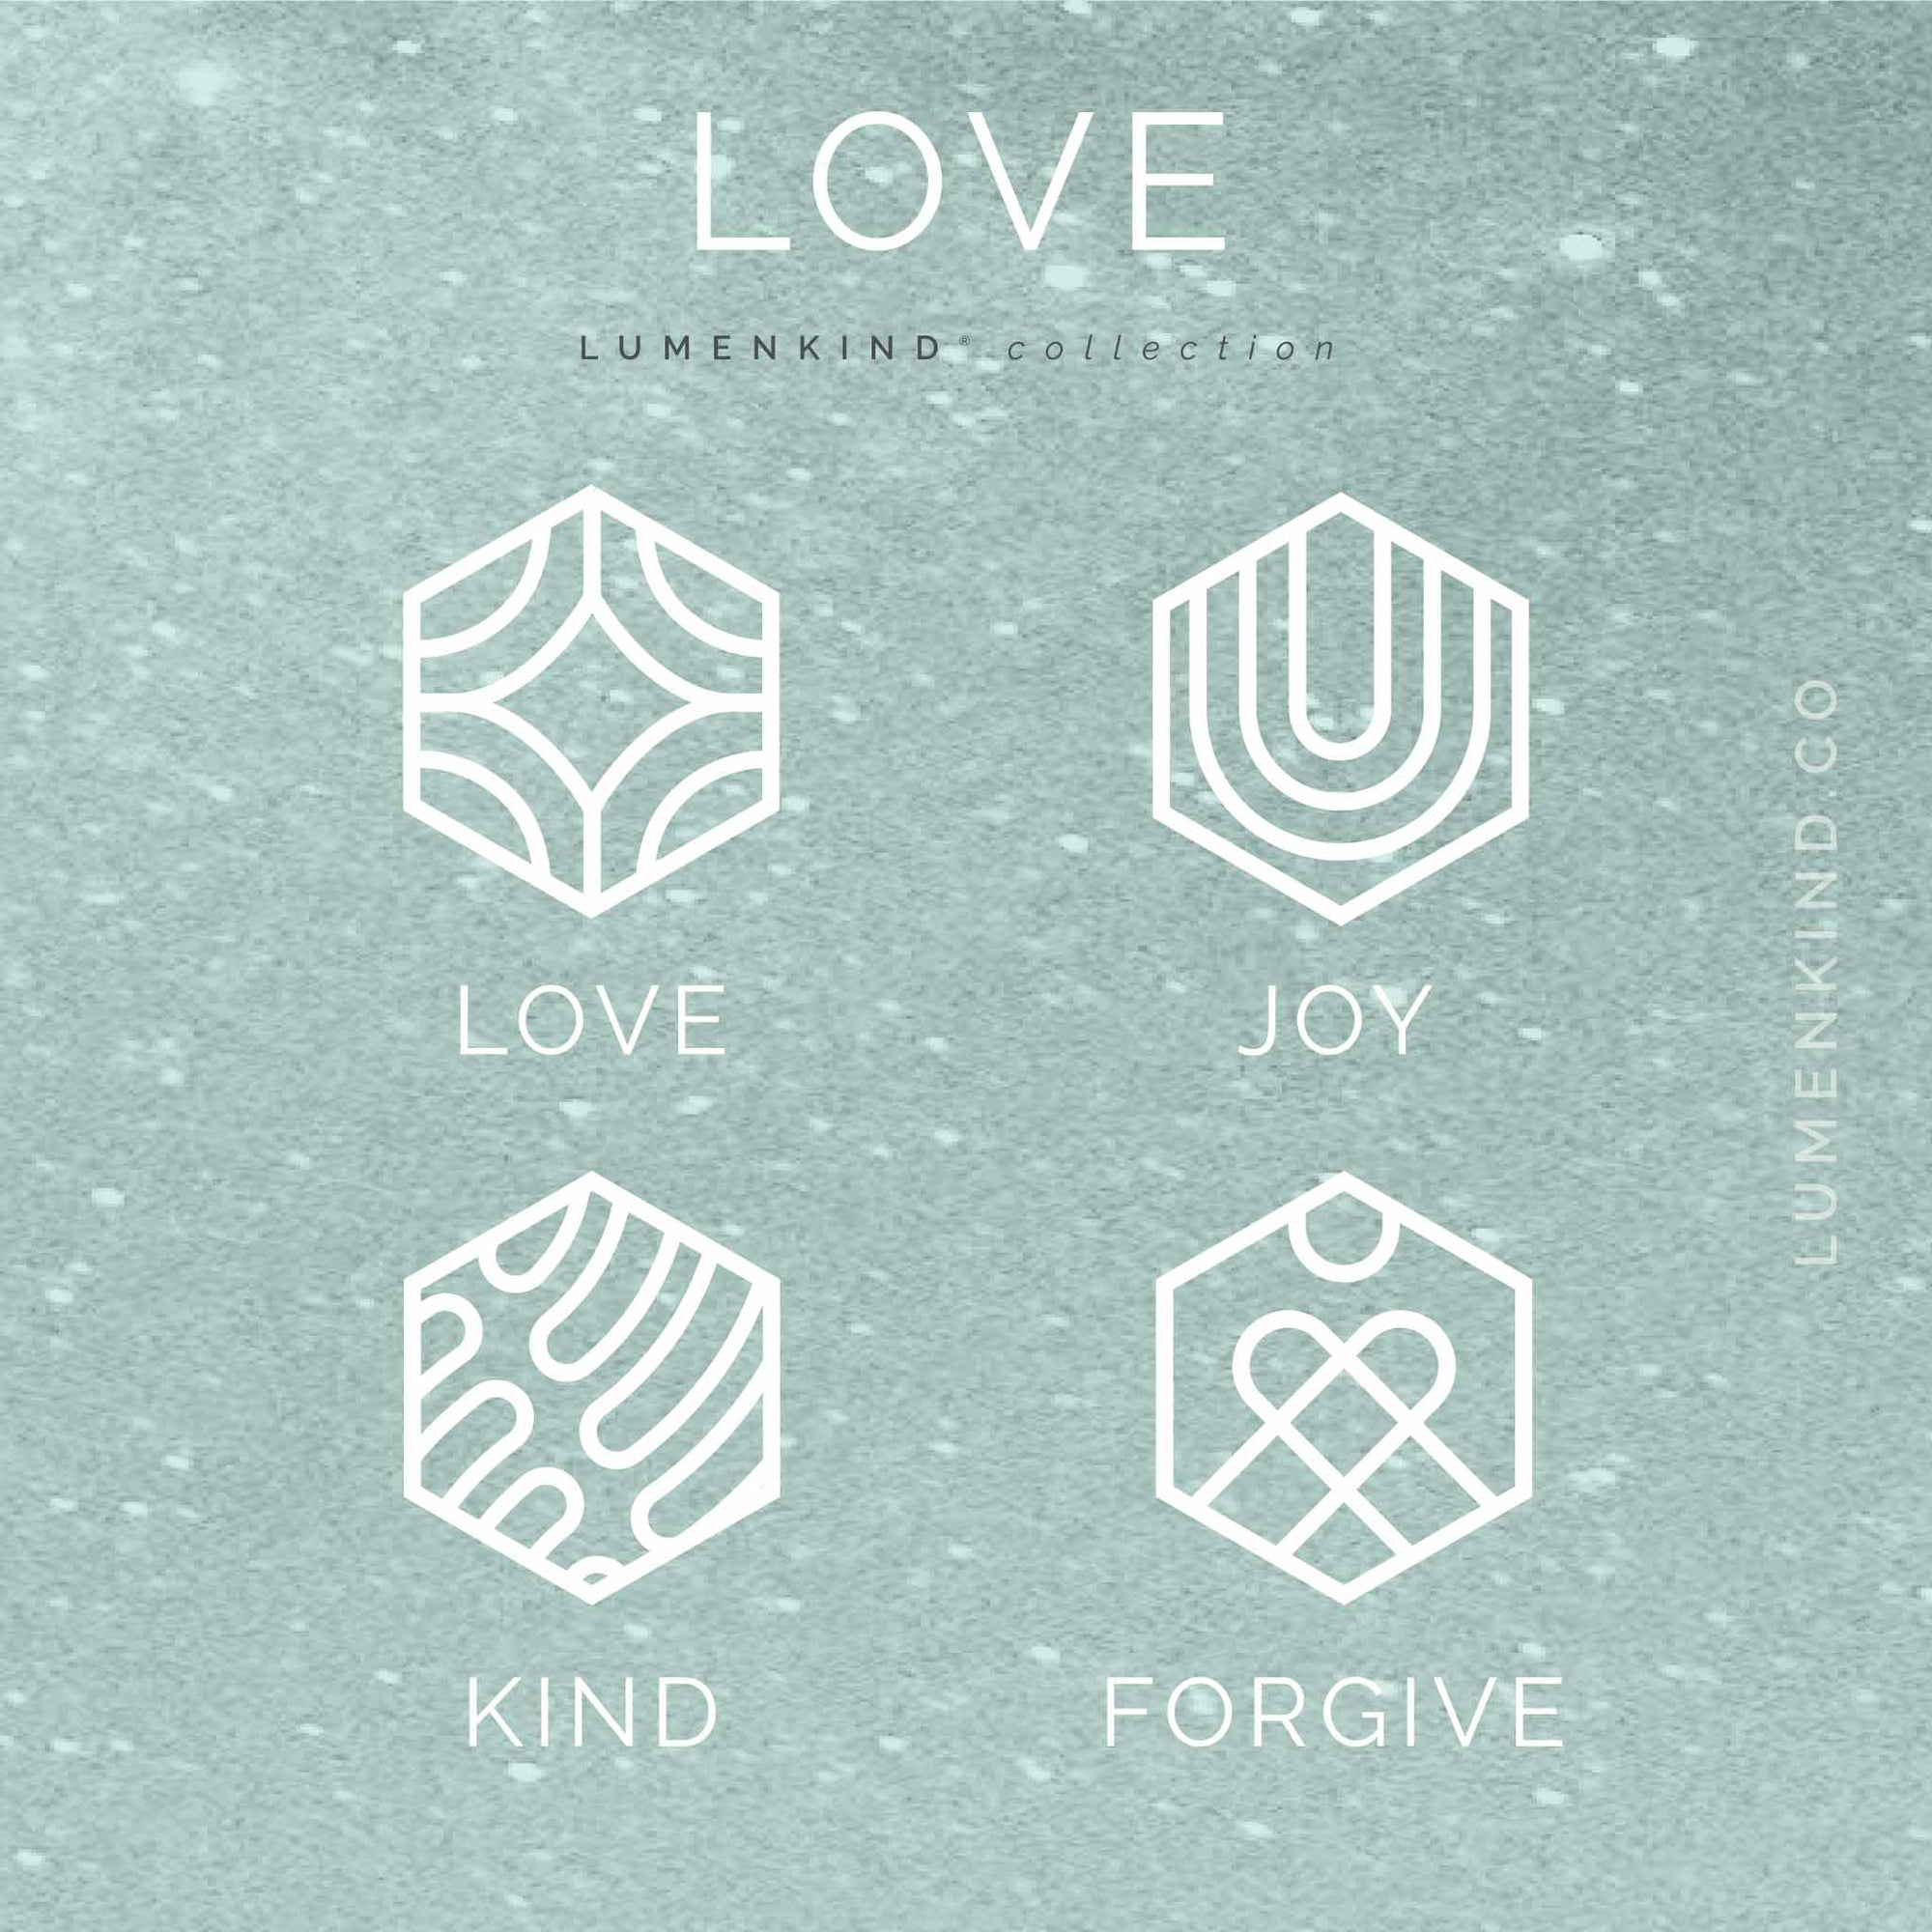 The Love Collection of Mindful Marks includes Love, Forgive, Joy, and Kind.